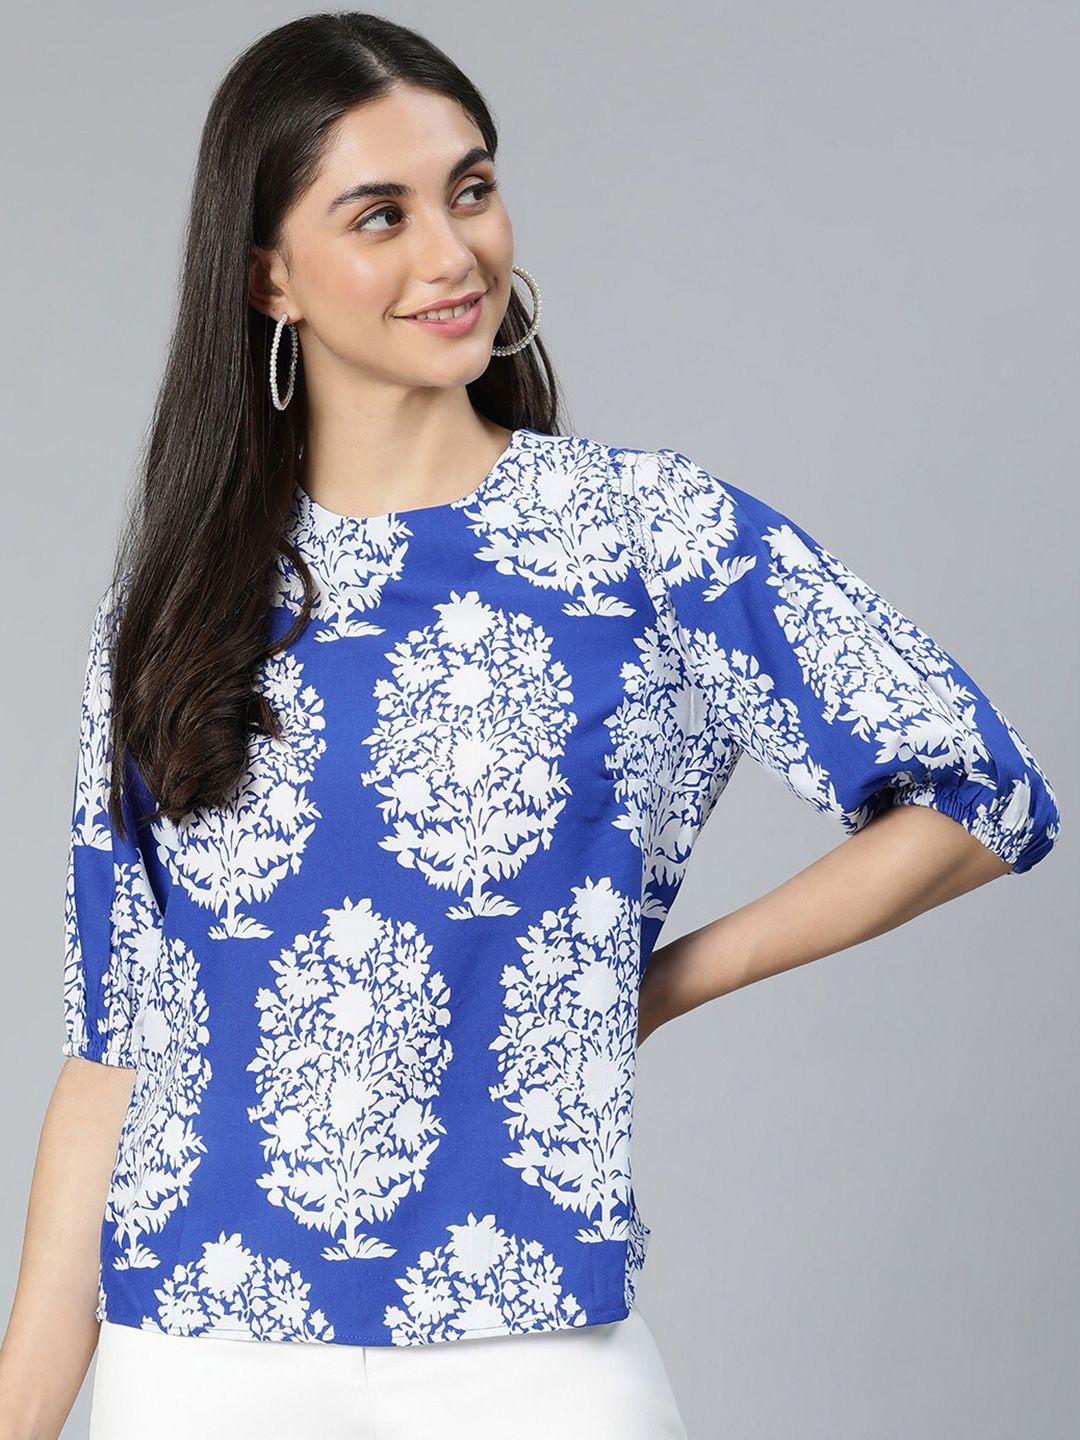 oxolloxo-blue-floral-printed-top